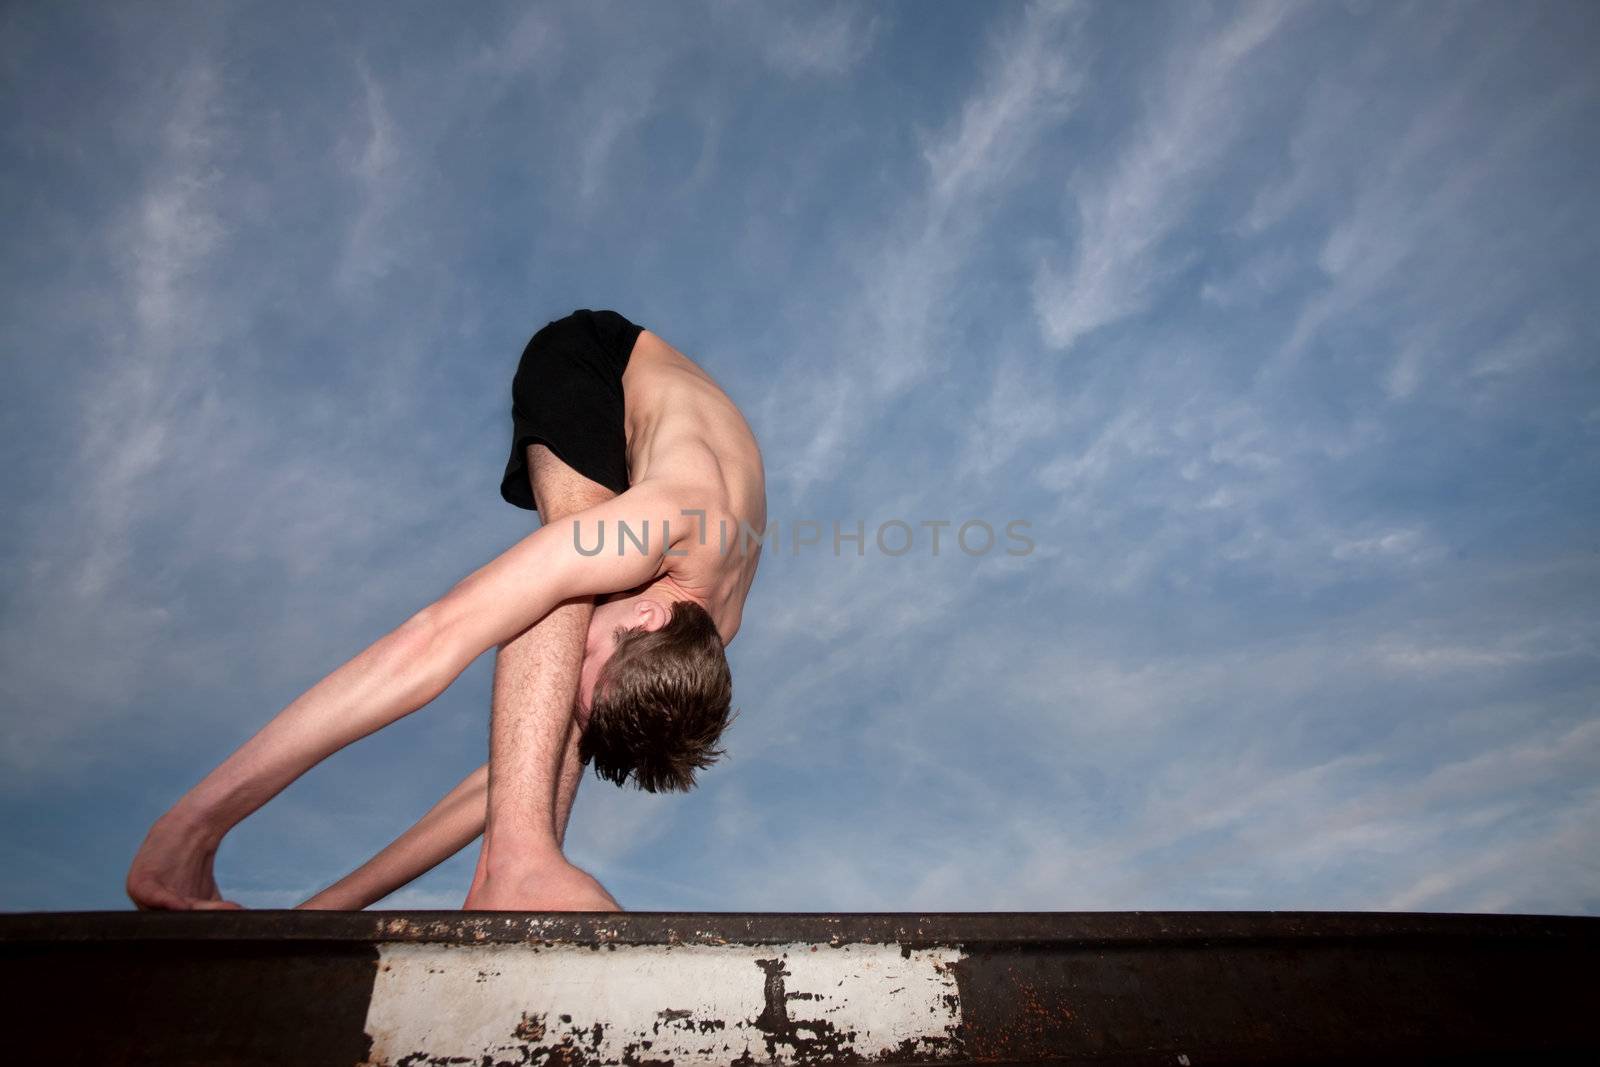 Extremely flexible yoga practitioner outside on rail track